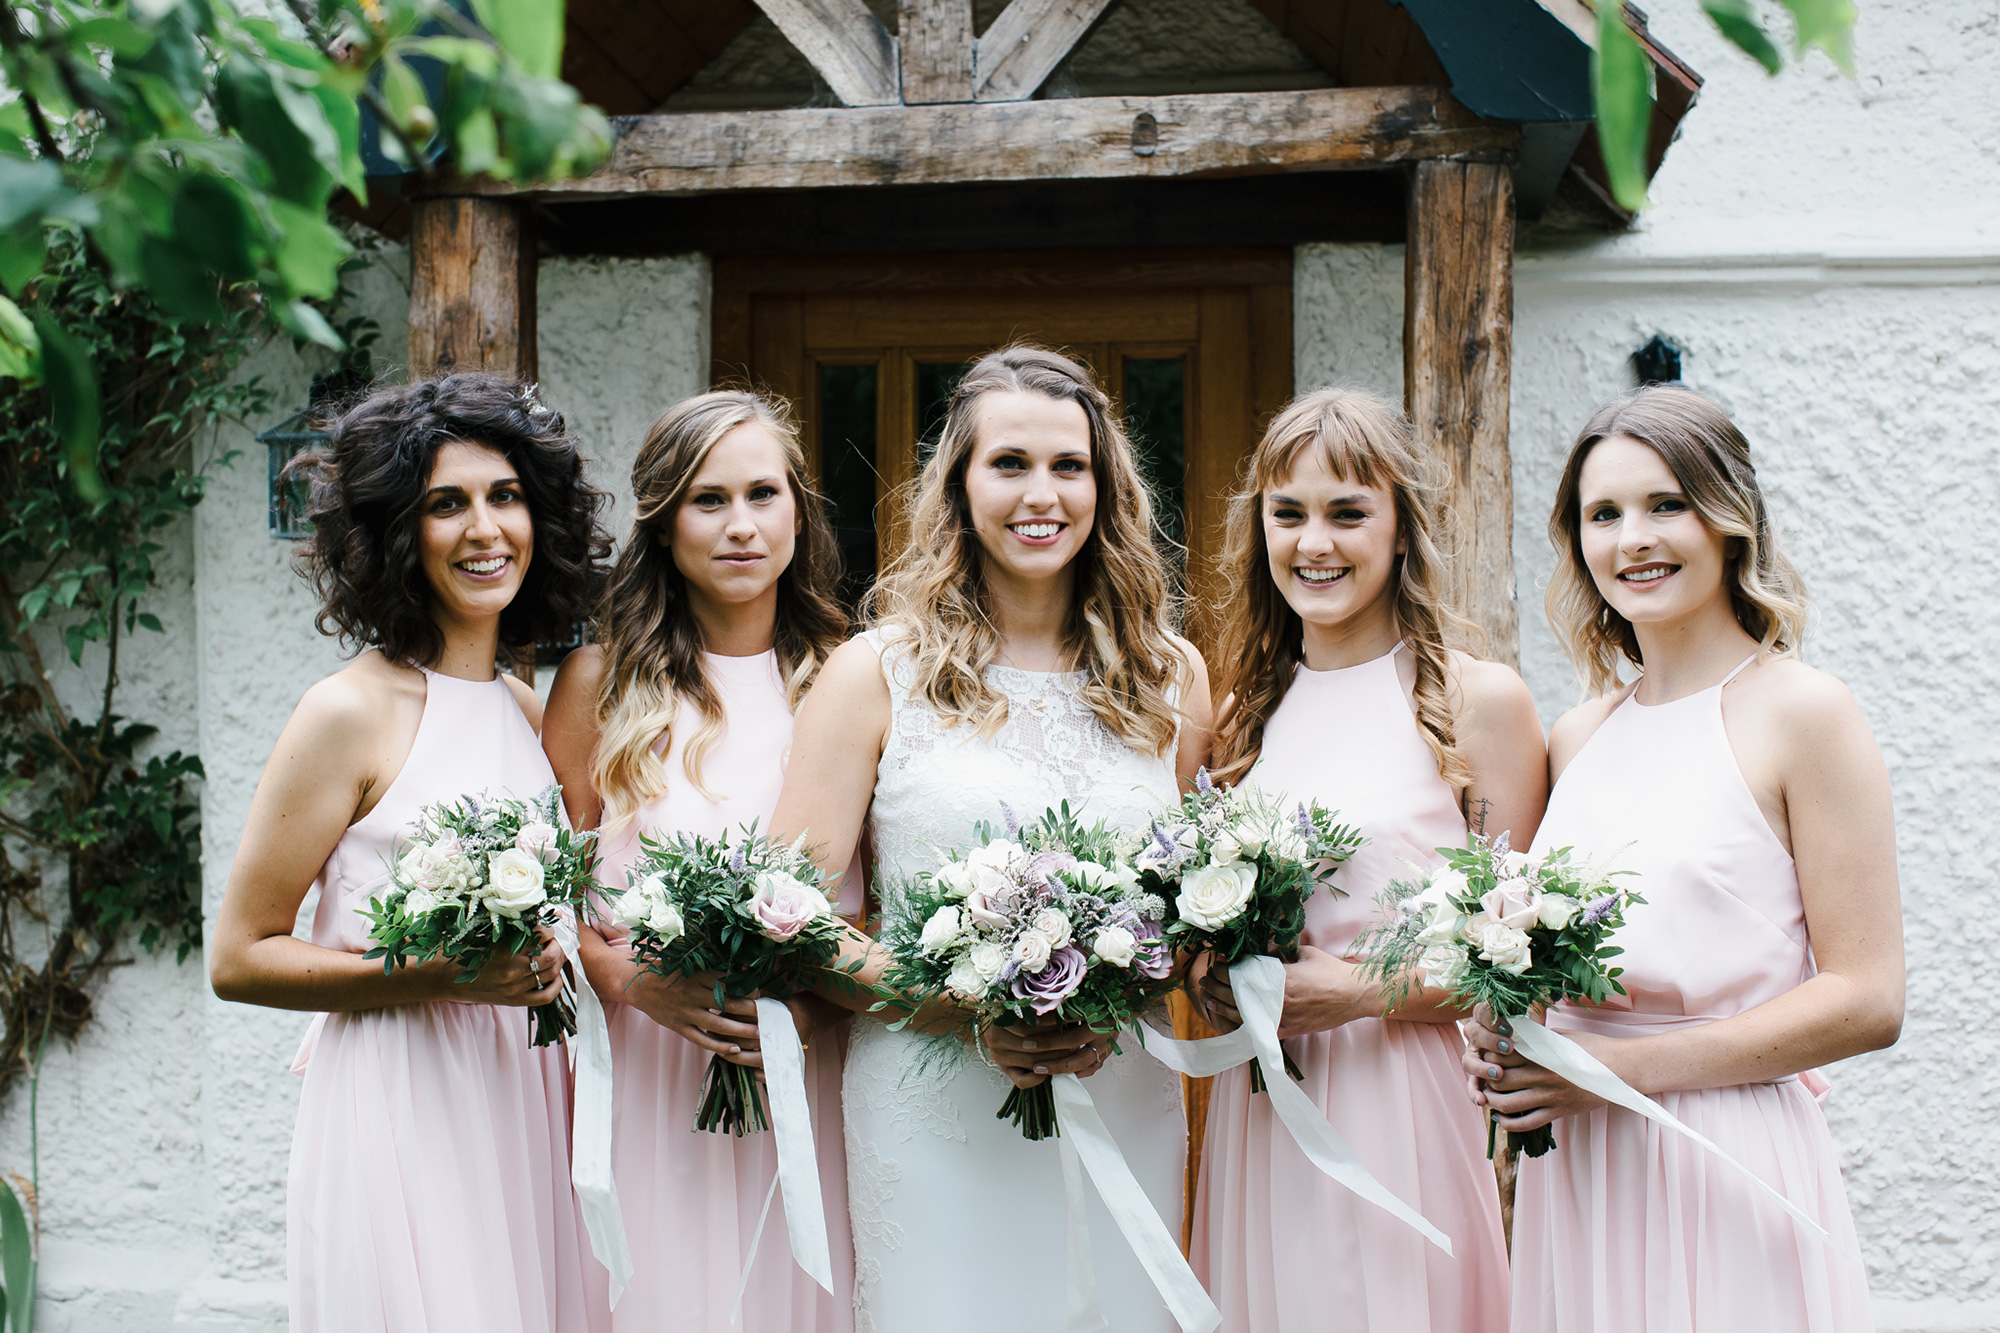 Sophie James Country Rustic Wedding Chris Barber Photography 009